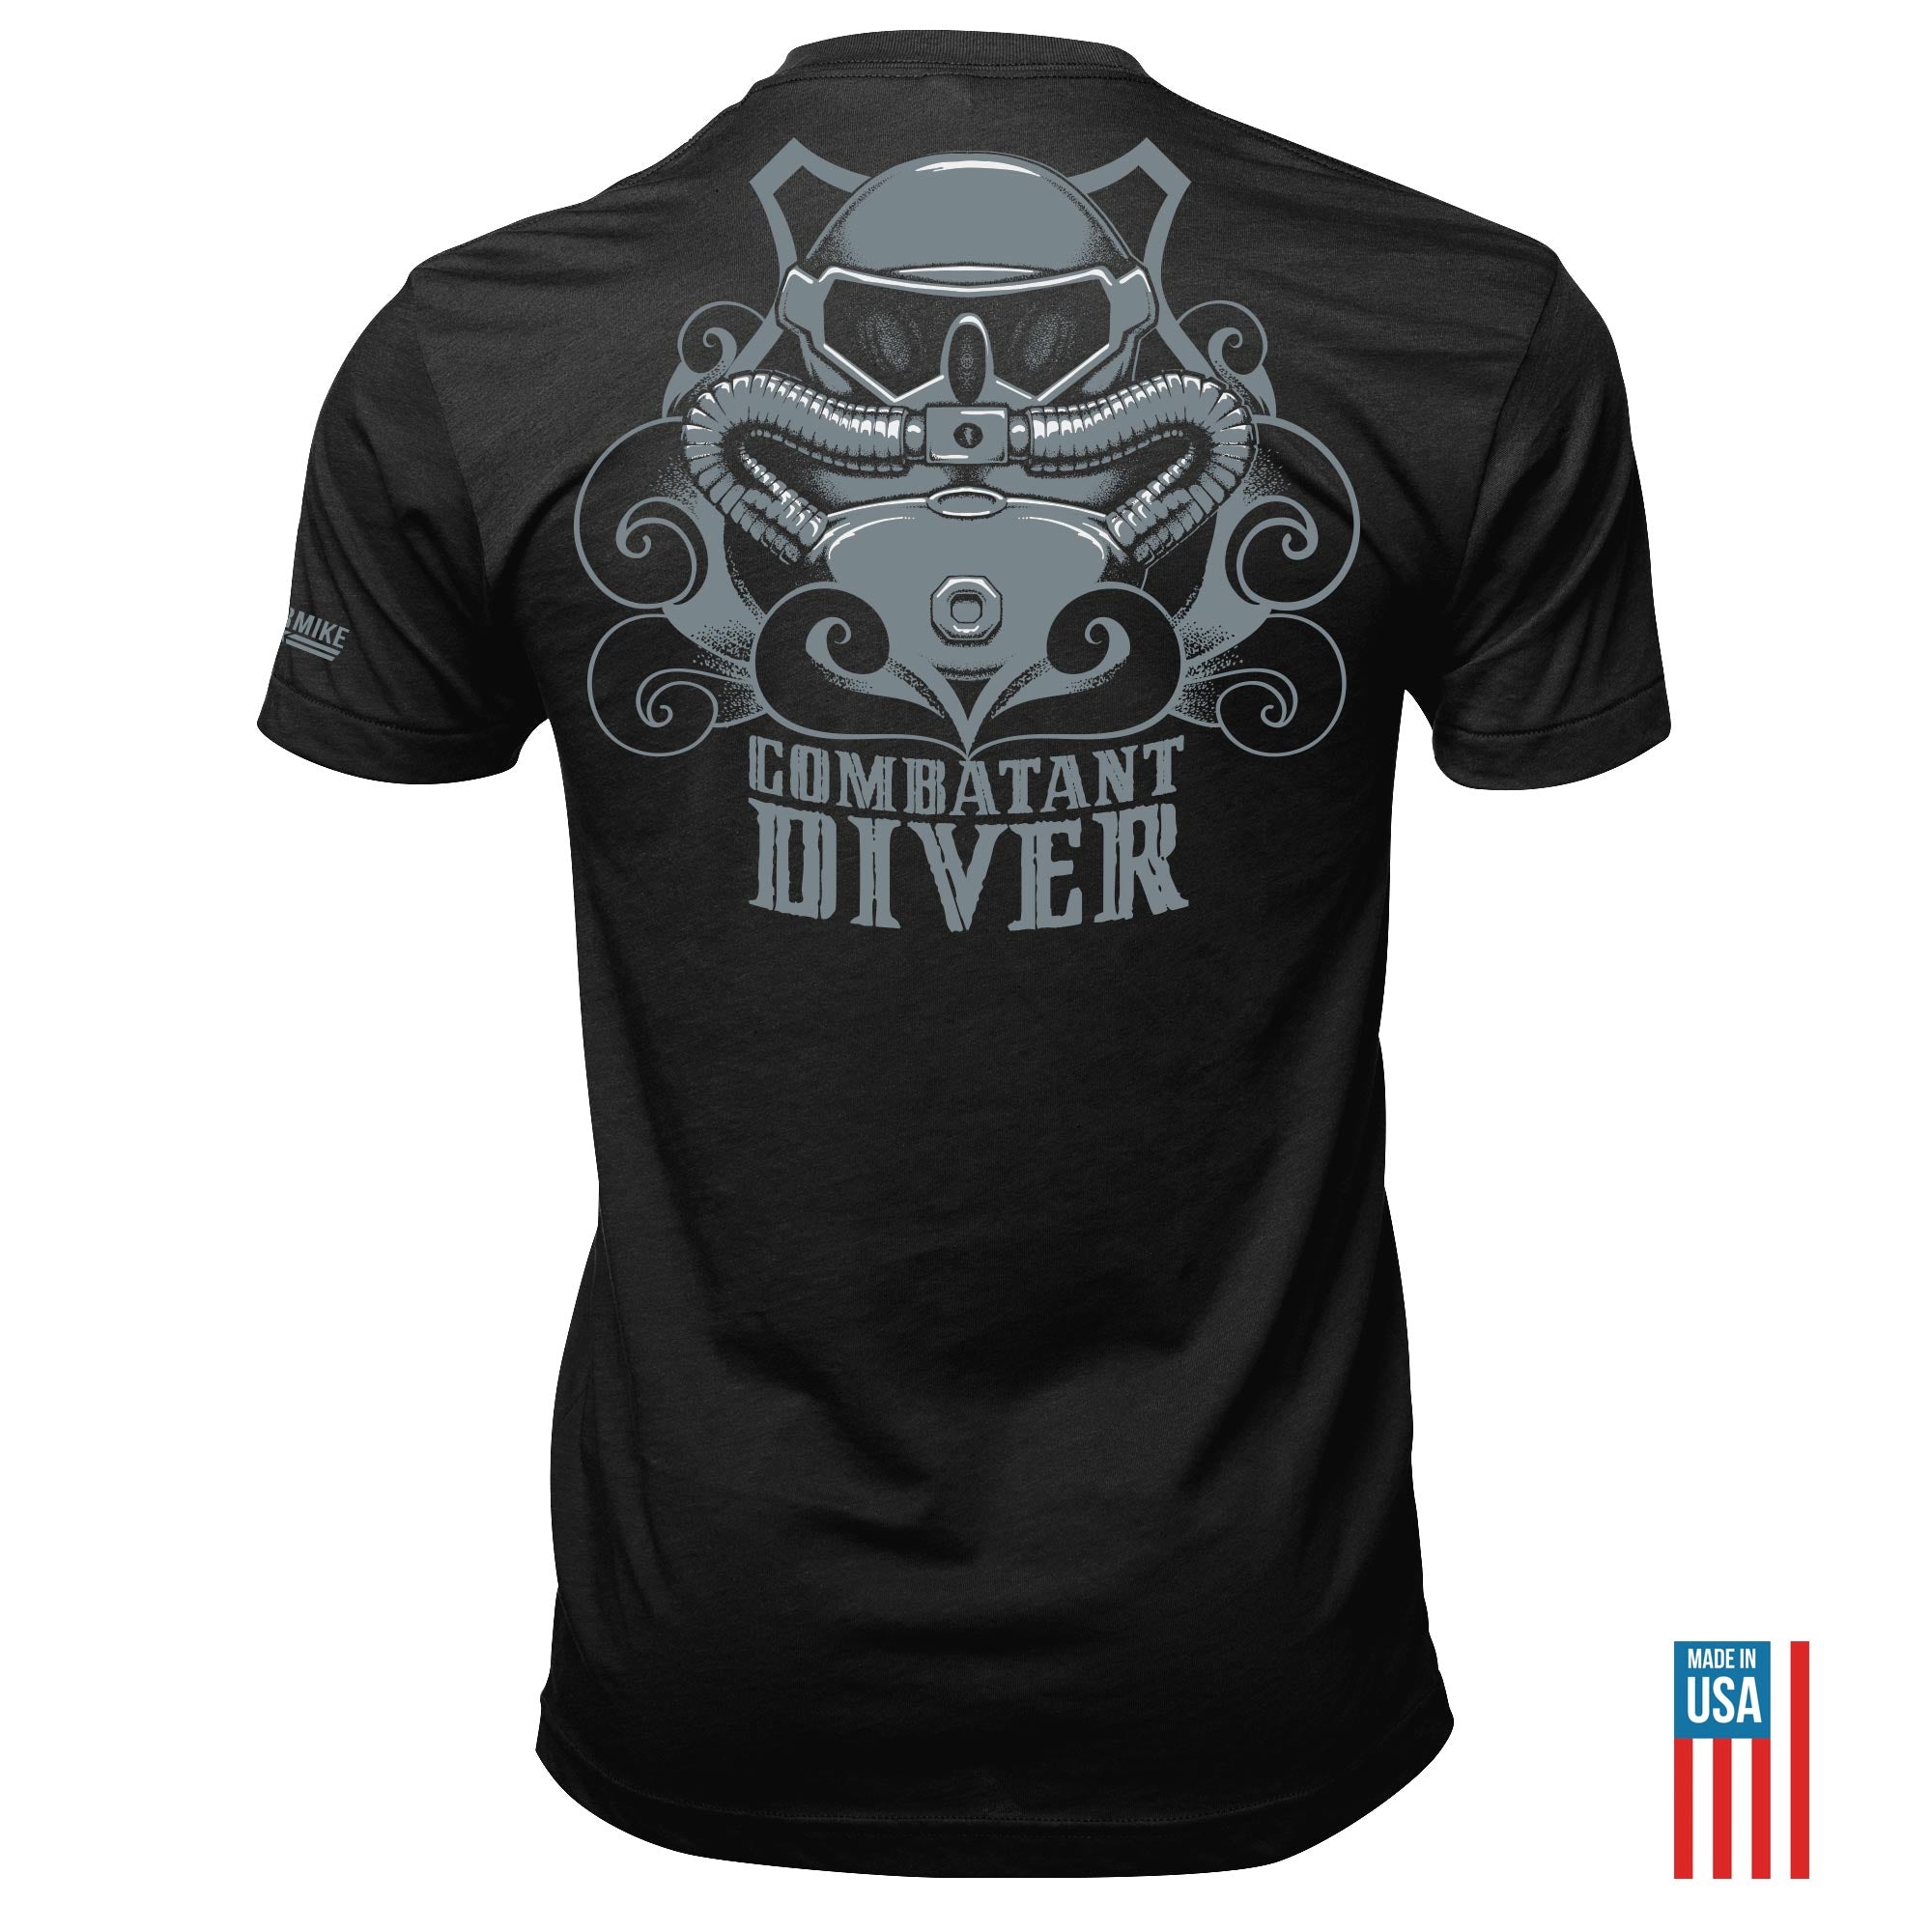 Combatant Diver Tee T-Shirt from Oscar Mike Apparel